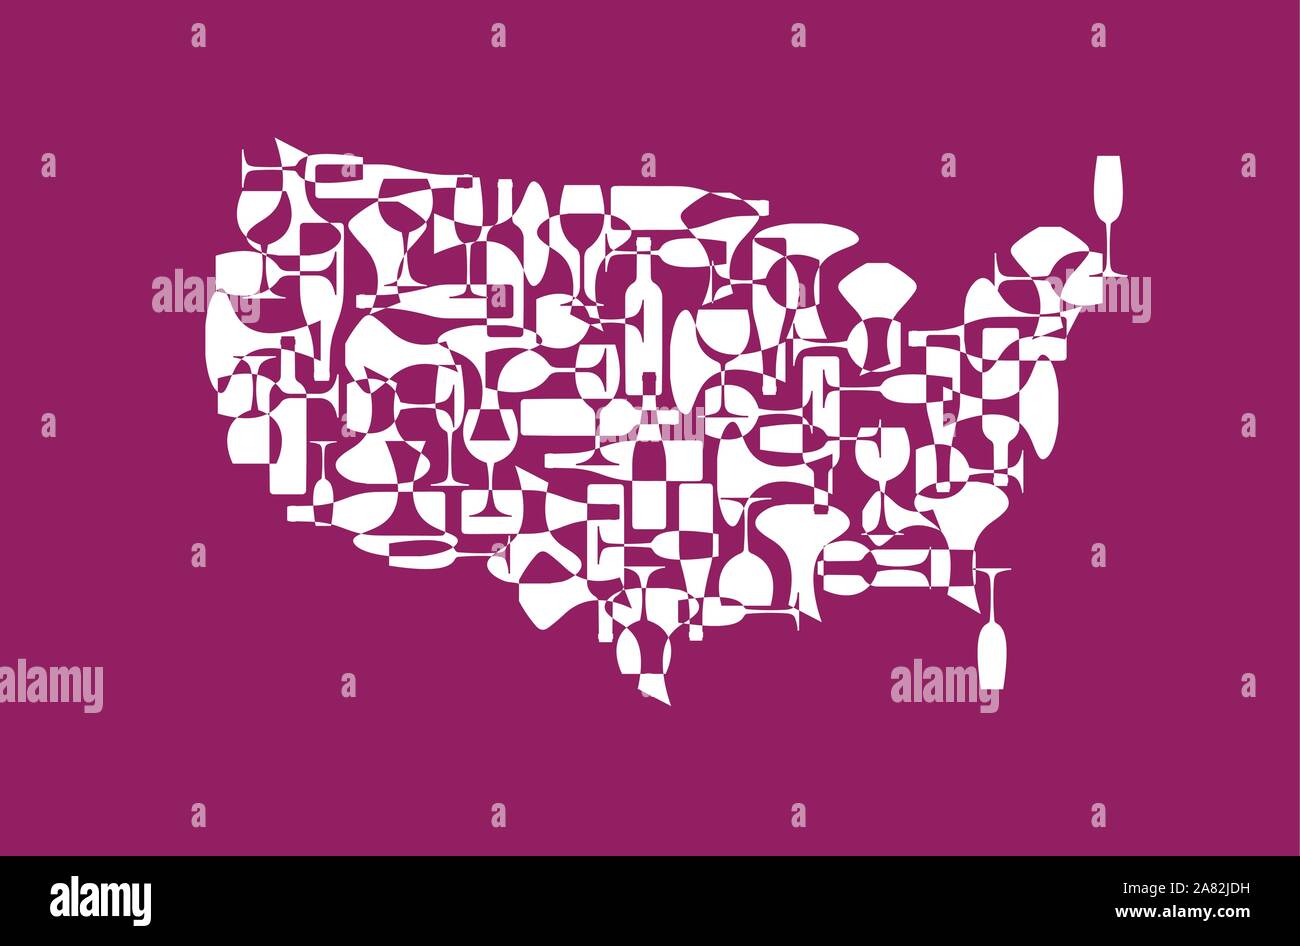 Countries winemakers - stylized maps from silhouettes of wine bottles, glasses and decanters. Map of United States. Stock Vector